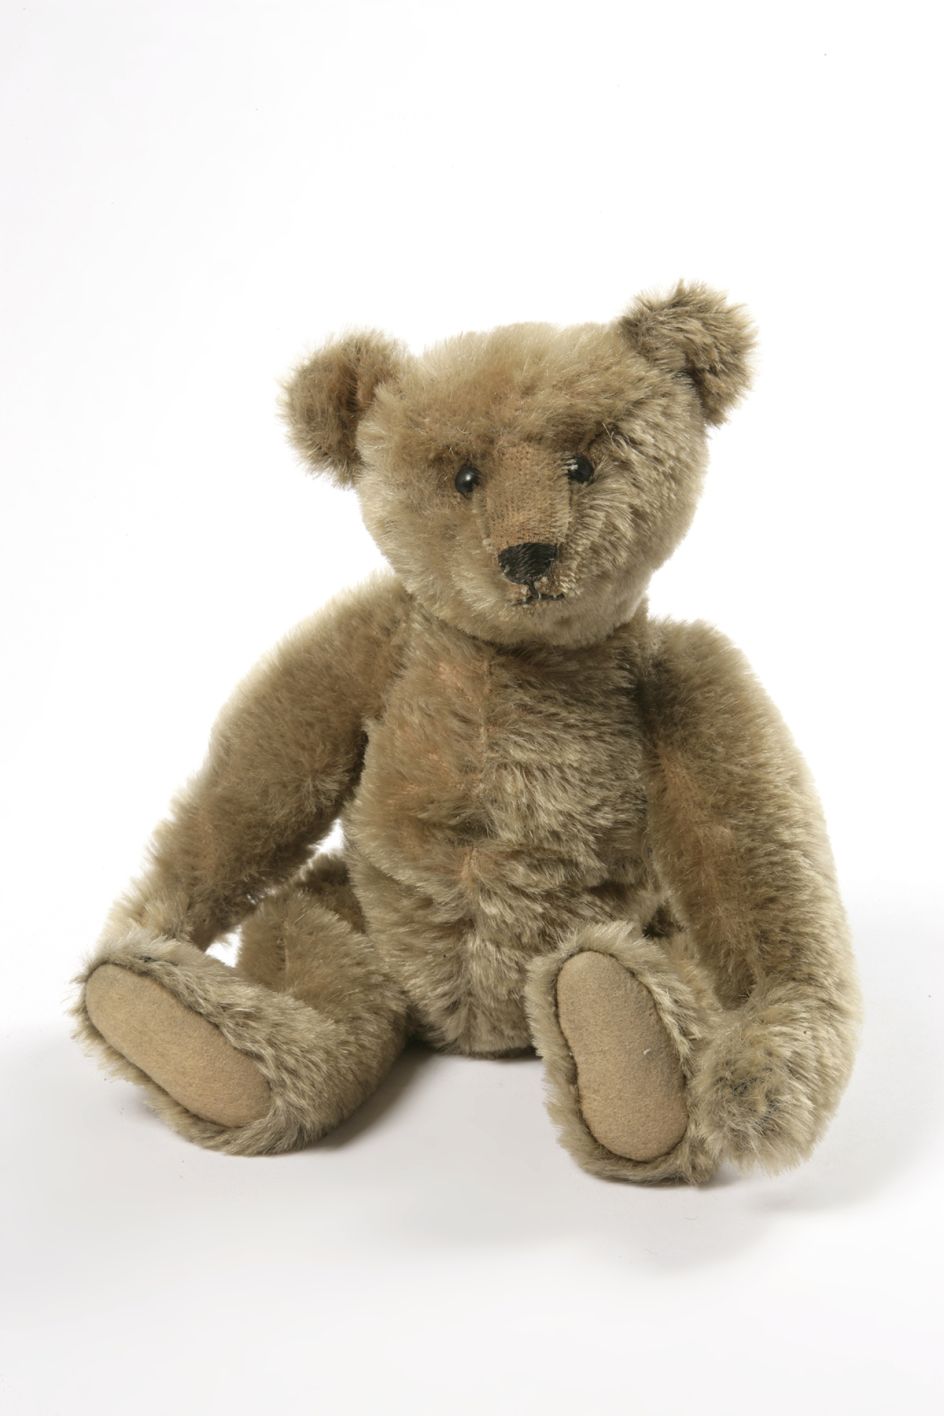 Teddy Bear manufactured by Margarete Steiff ca. 1906-1910. Stuffed and sewn mohair plush. Bequeathed by Miss Z. N. Ziegler. (c) Victoria and Albert Museum, London